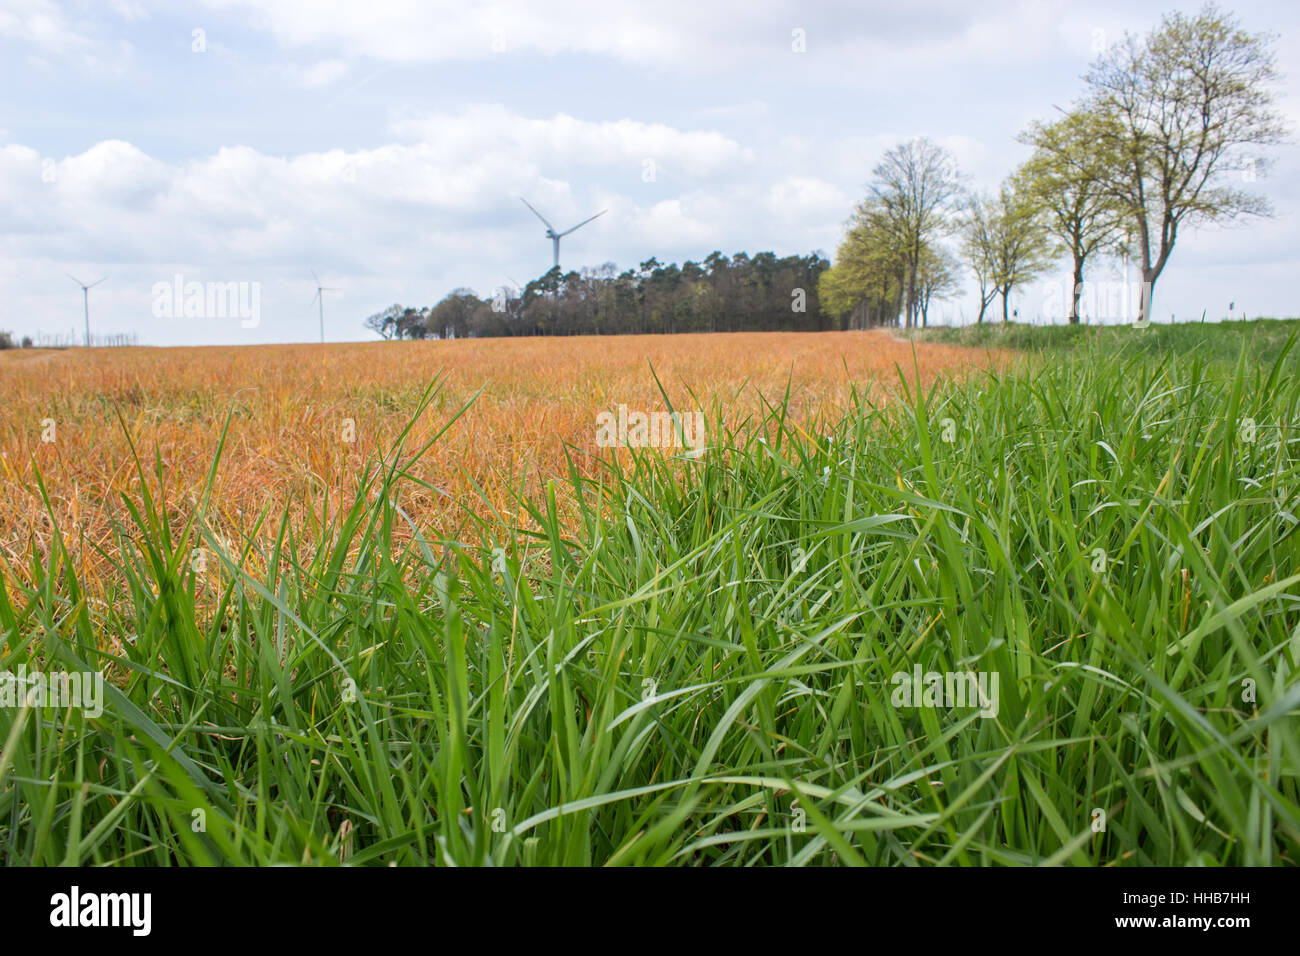 Field in spring, which has been treated with weed killers Stock Photo